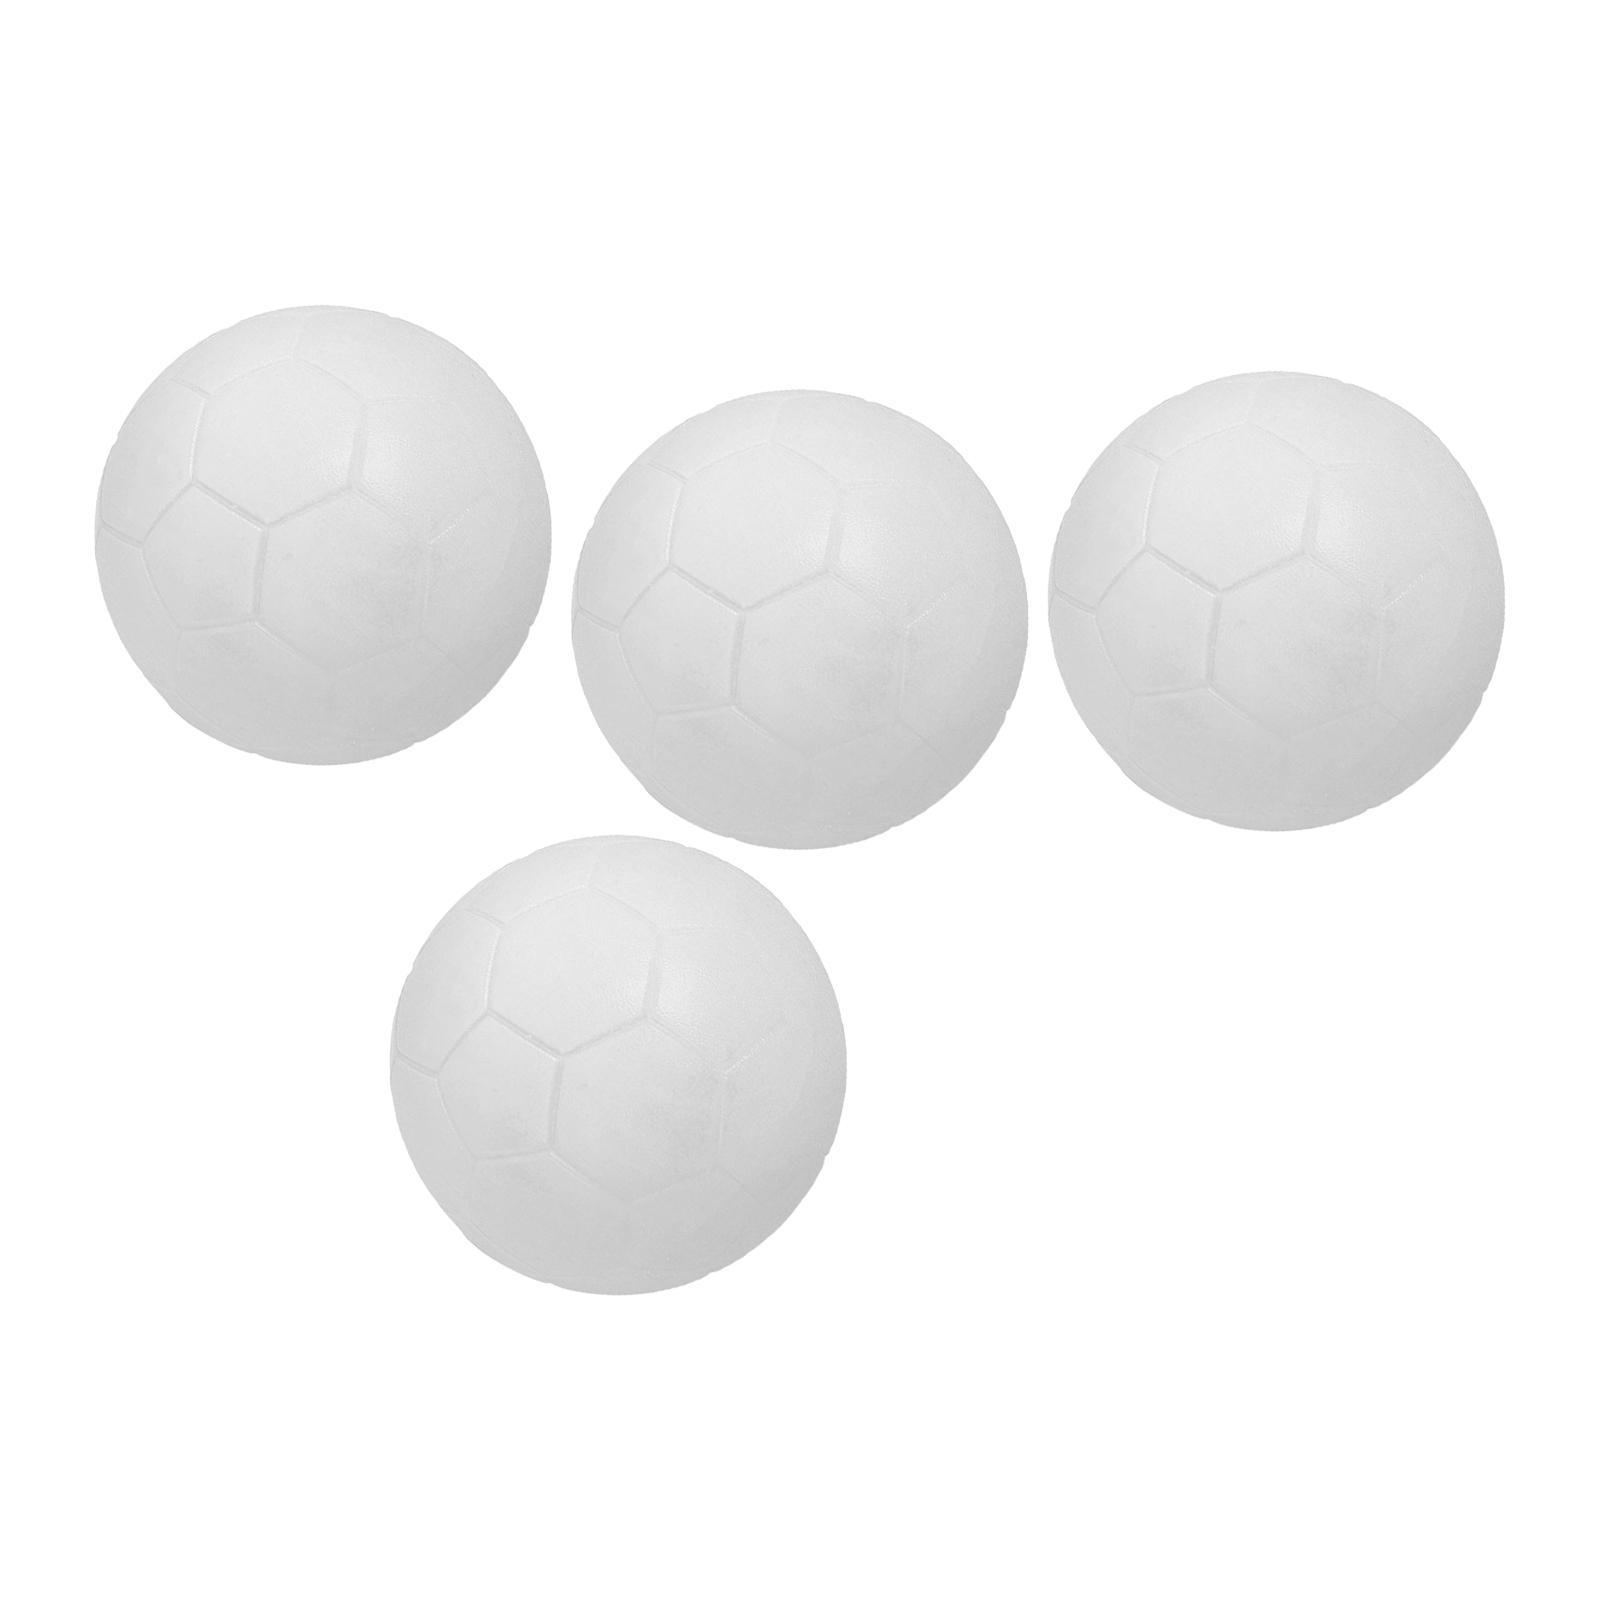 4Pcs Mini Replacement Balls Table Soccer 36mm Foosball Machine Tabletop Game